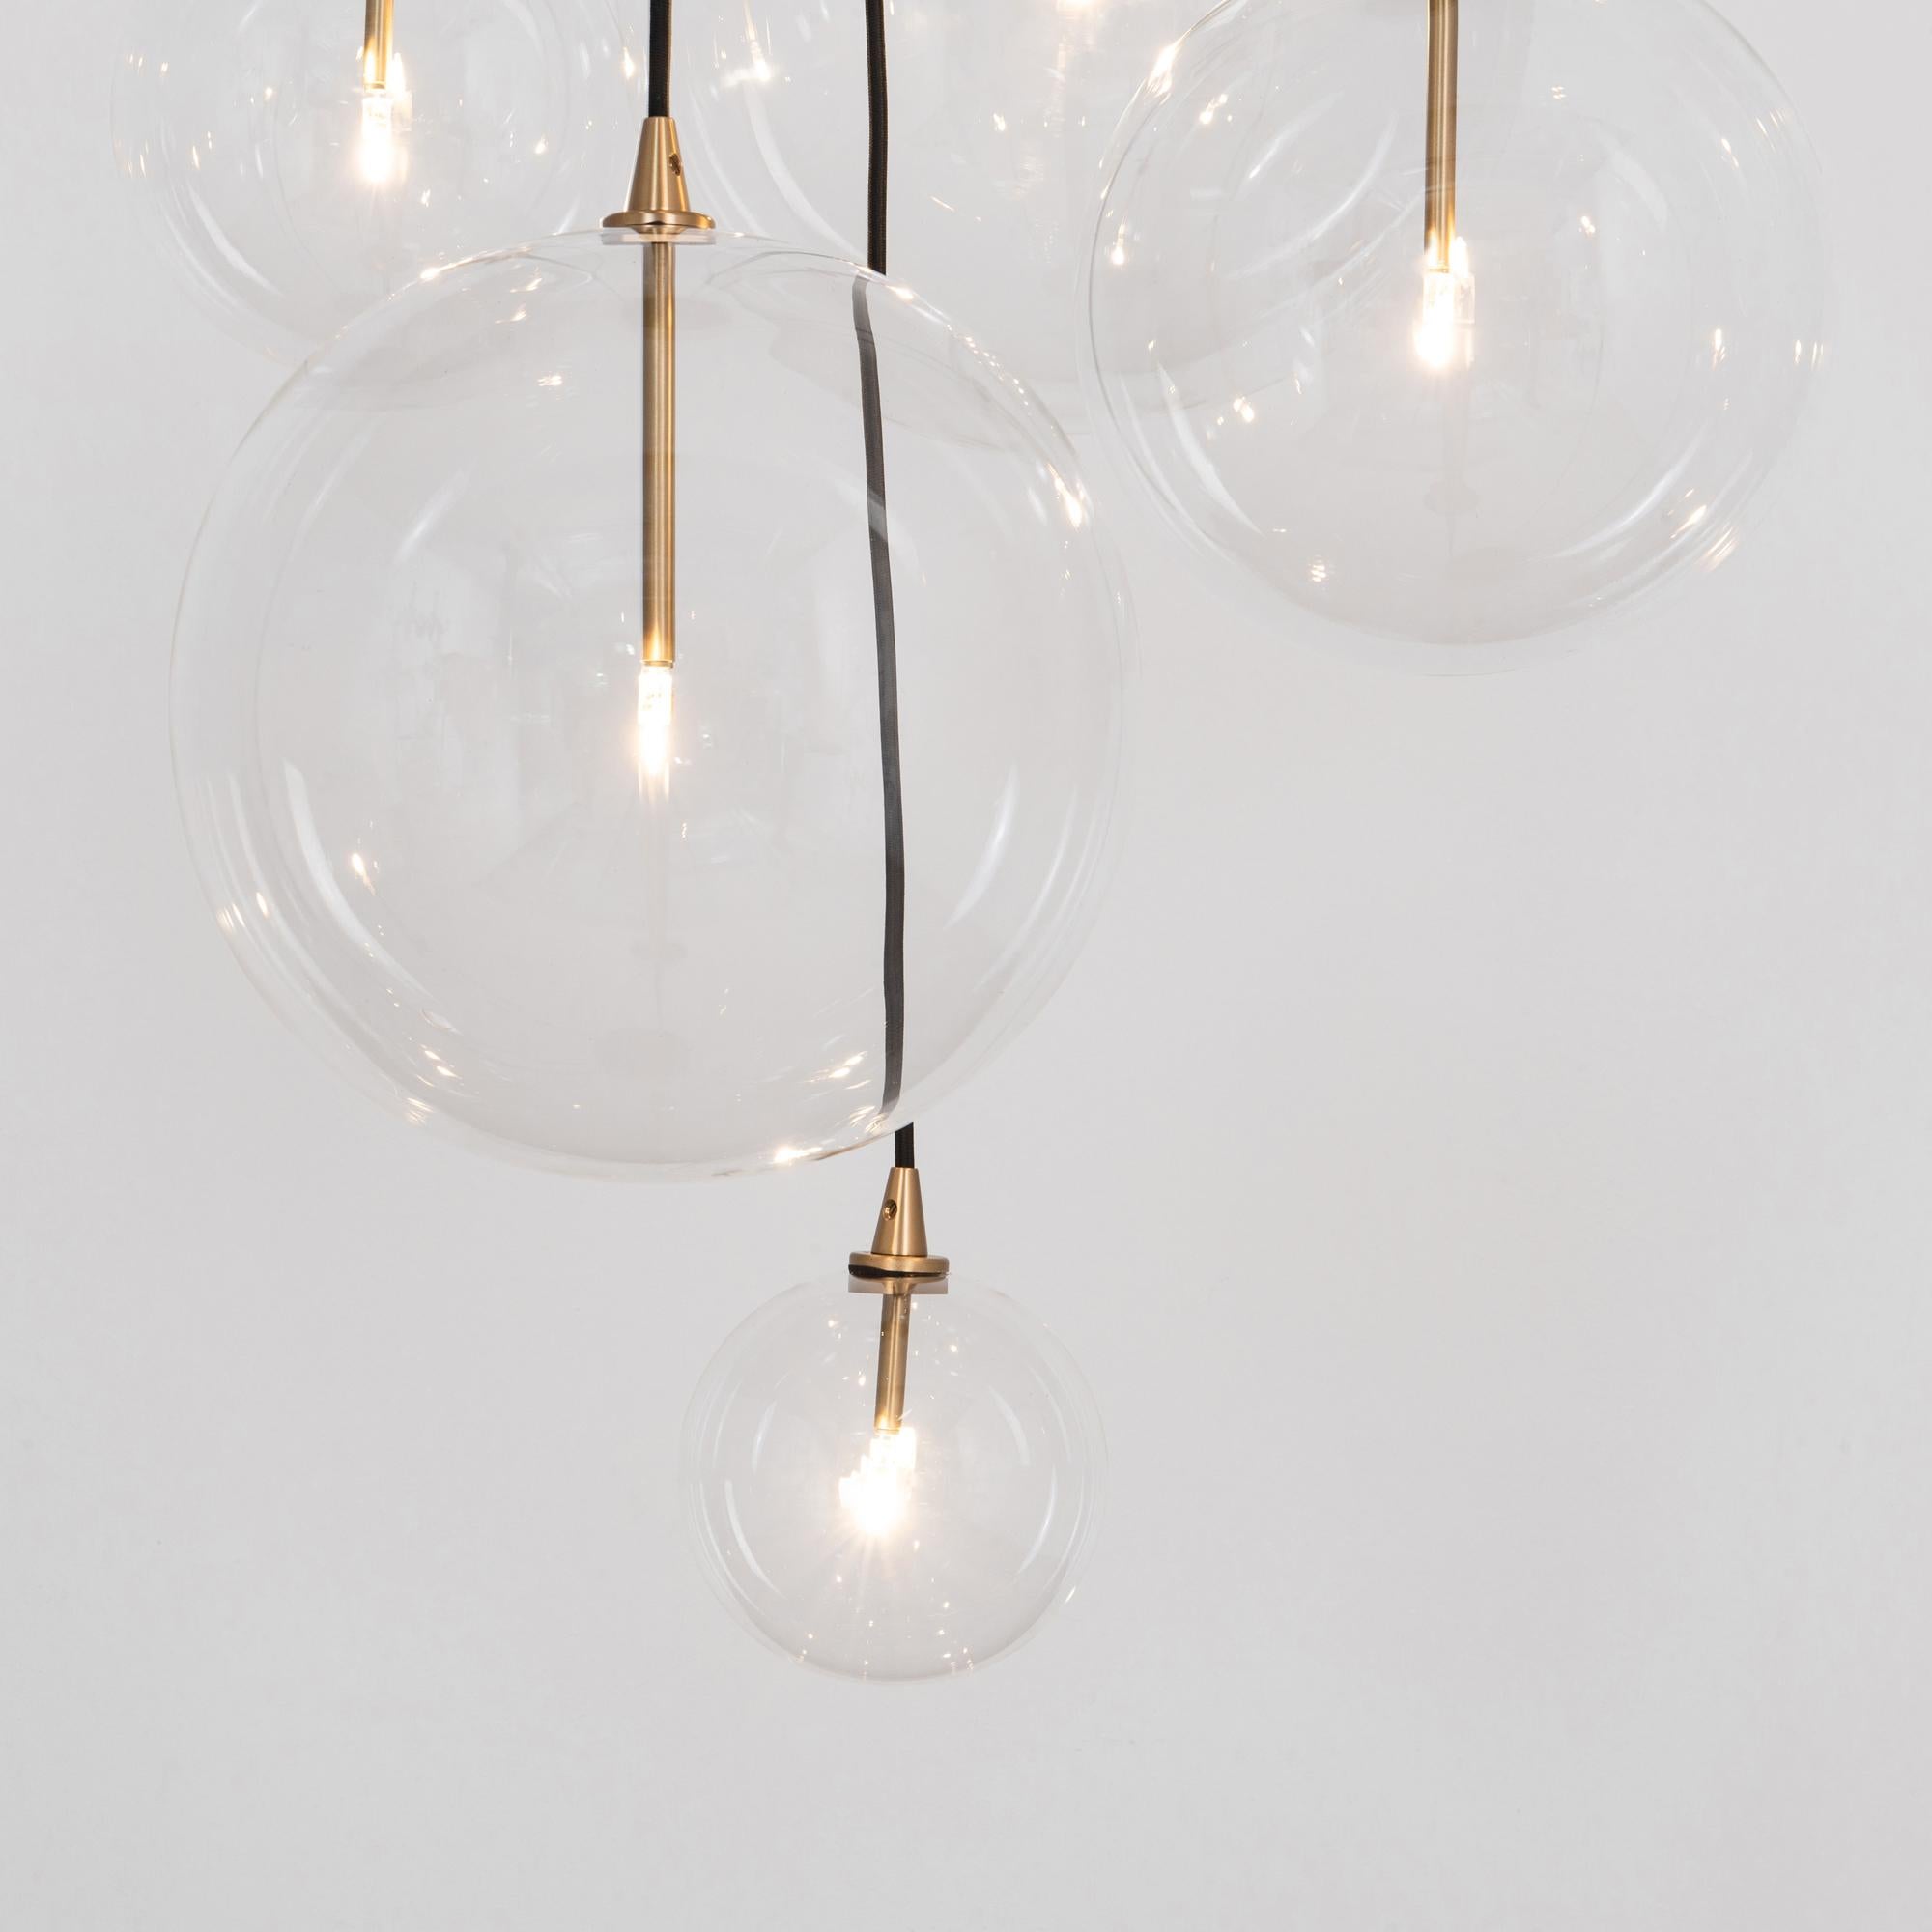 Polish Cluster 5 Mix Chandelier in Solid Brass by Schwung For Sale